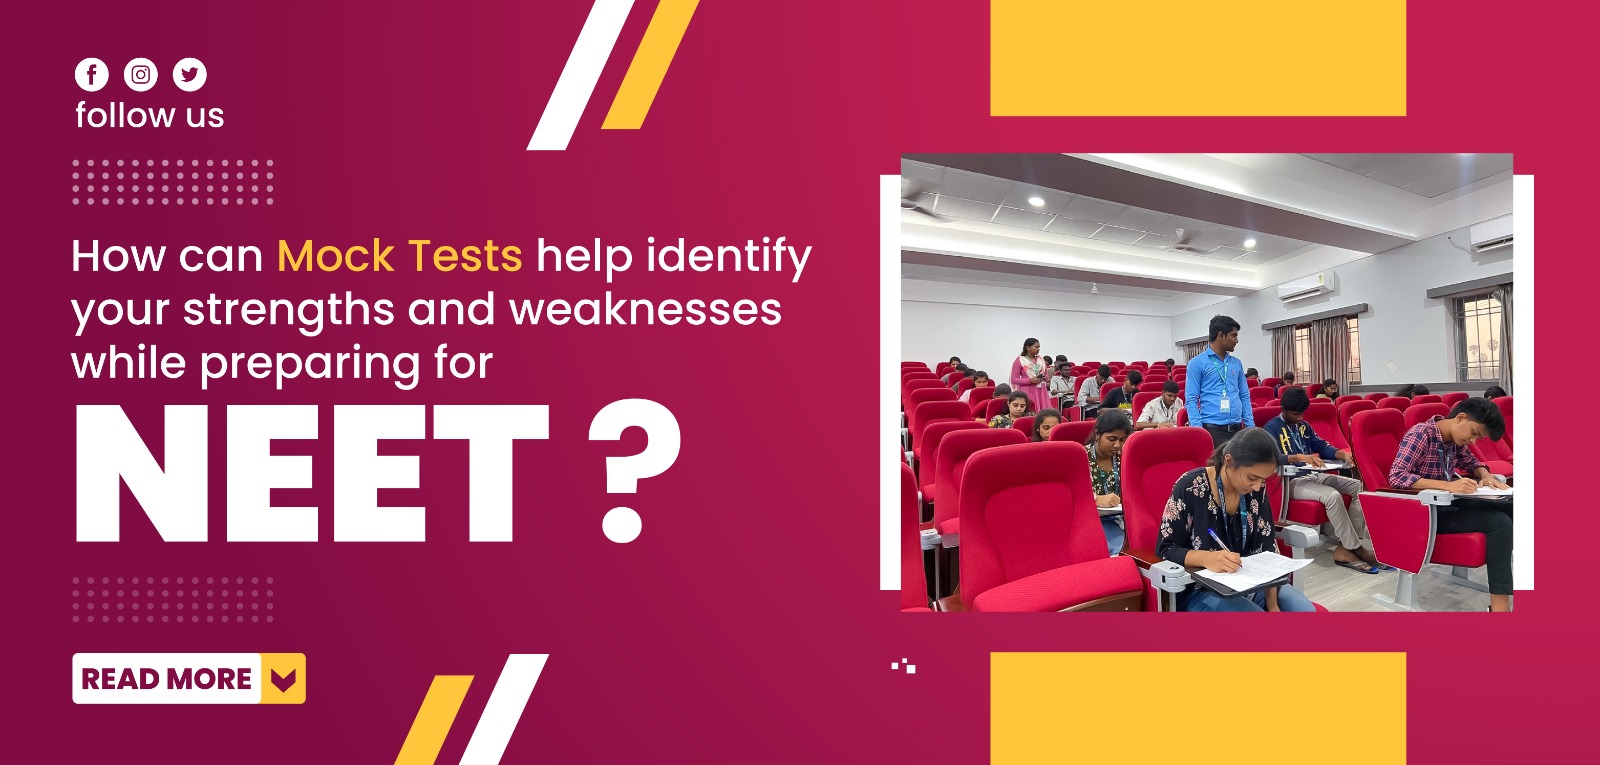 How can mock tests help identify your strengths and weaknesses while preparing for NEET?